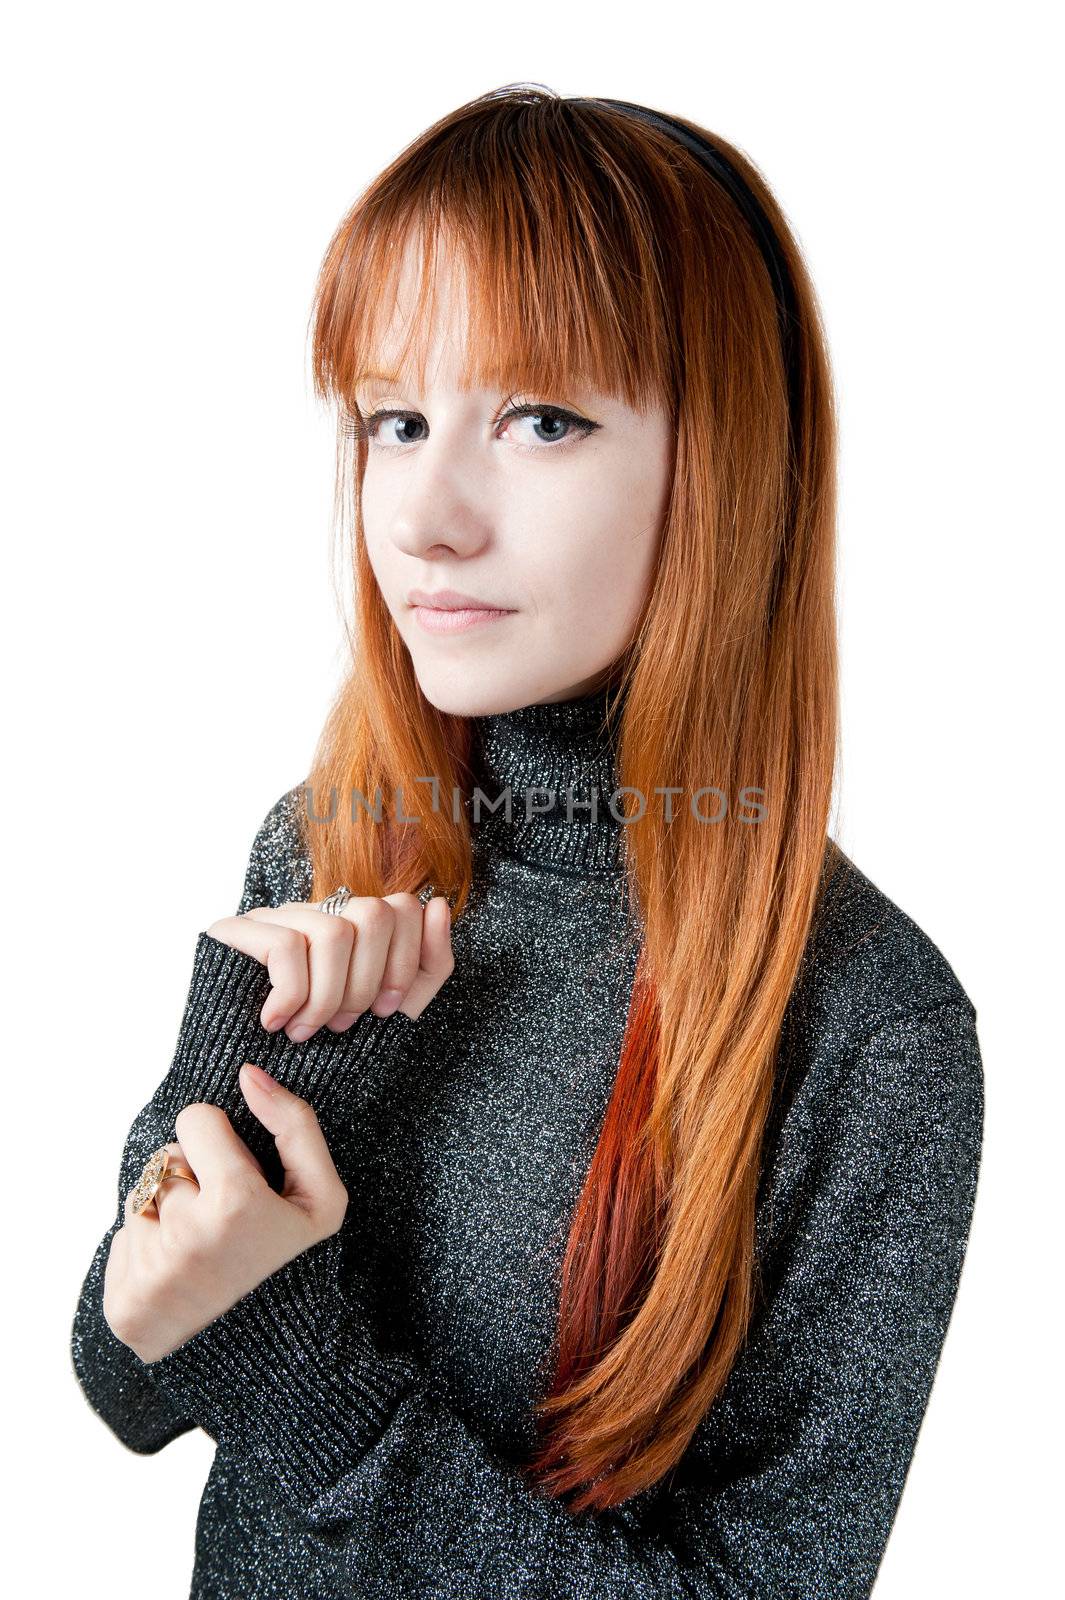 The beautiful girl with red long hair in a sweater isolated on white